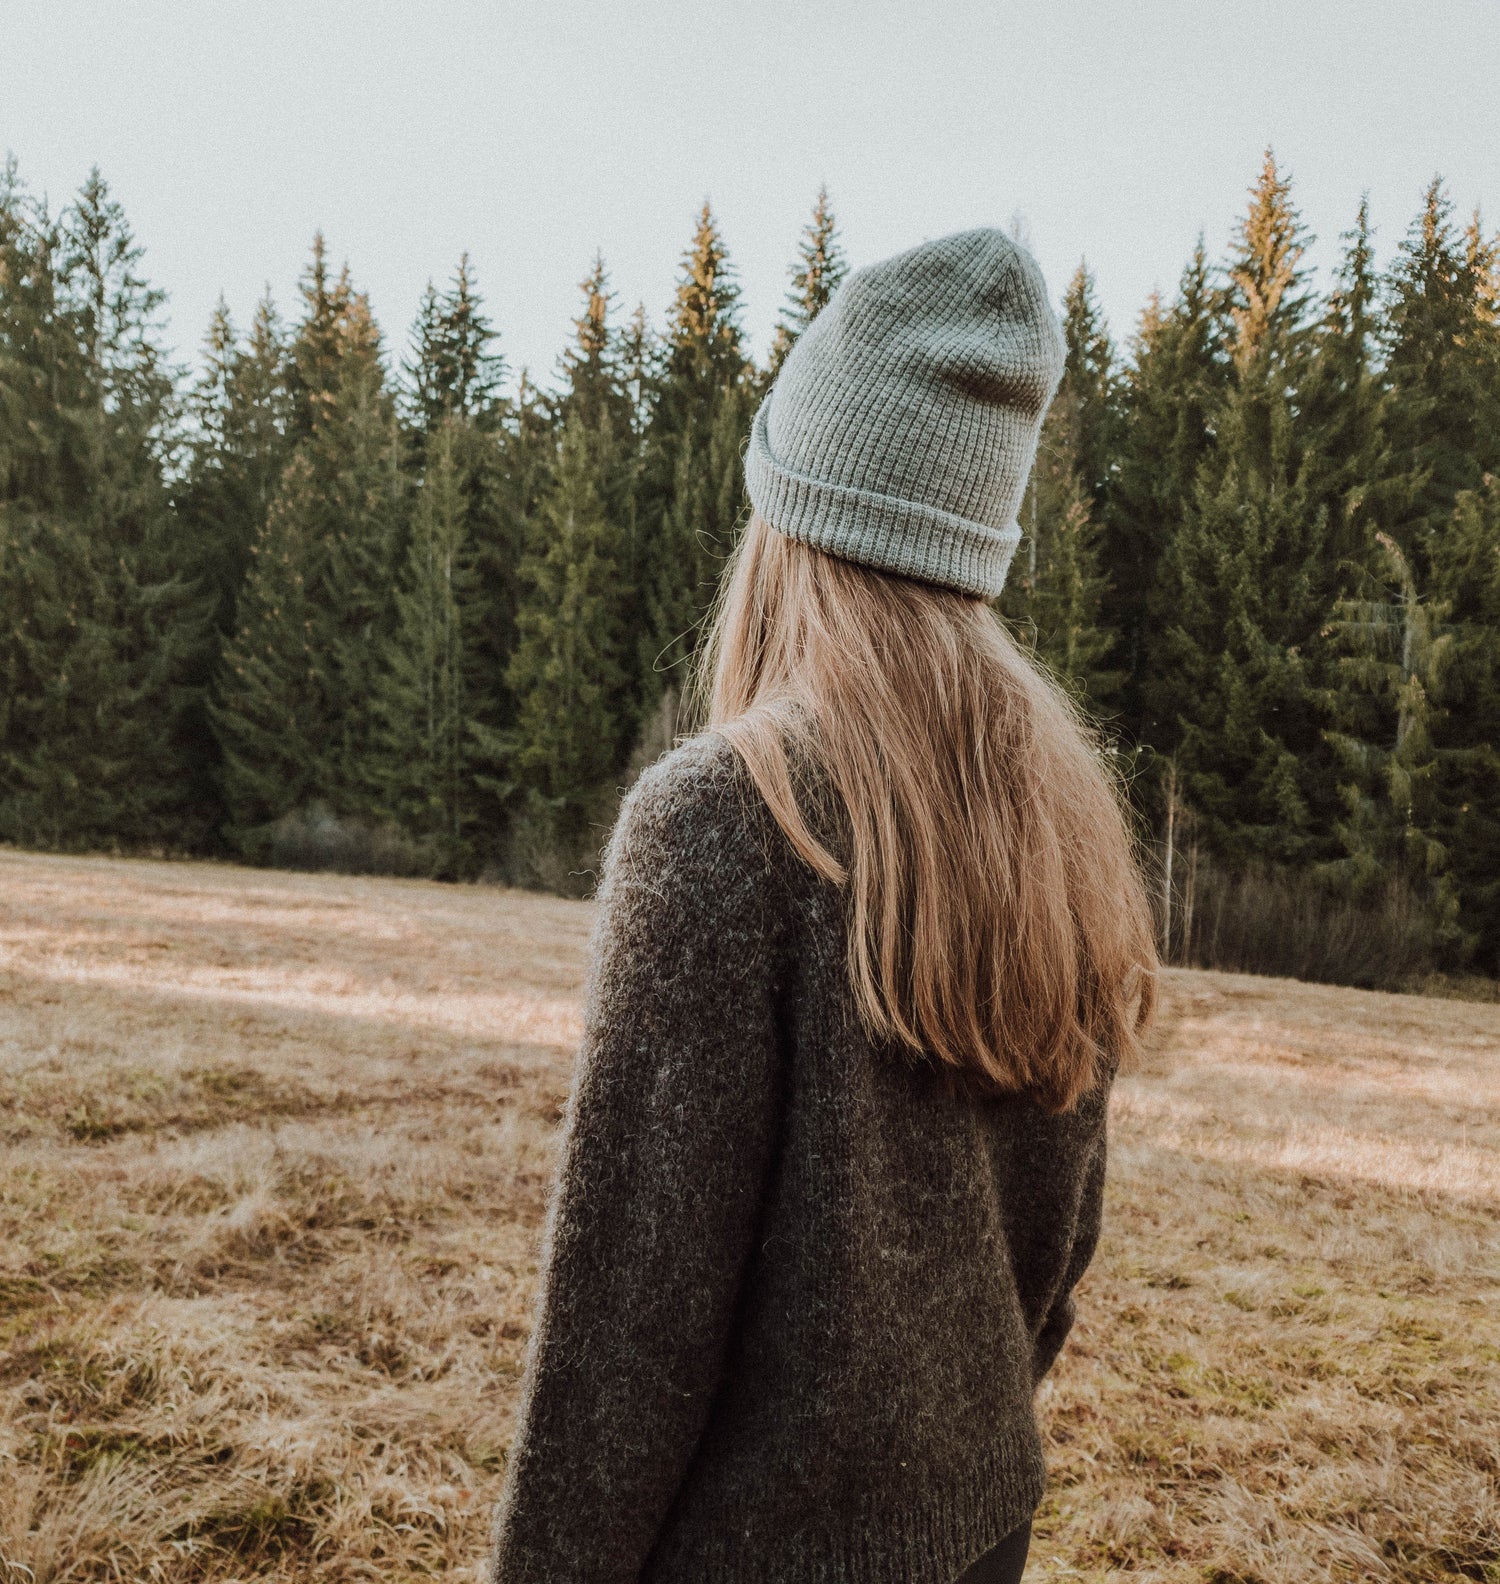 Knitwear designer Woodlandsknits long dark blonde hair, donned in a nature black hand-knitted sweater made from unspun yarn and a grey hat, standing in an alpine field, during sundown gazing towards the horizon graced by a line of tall trees.